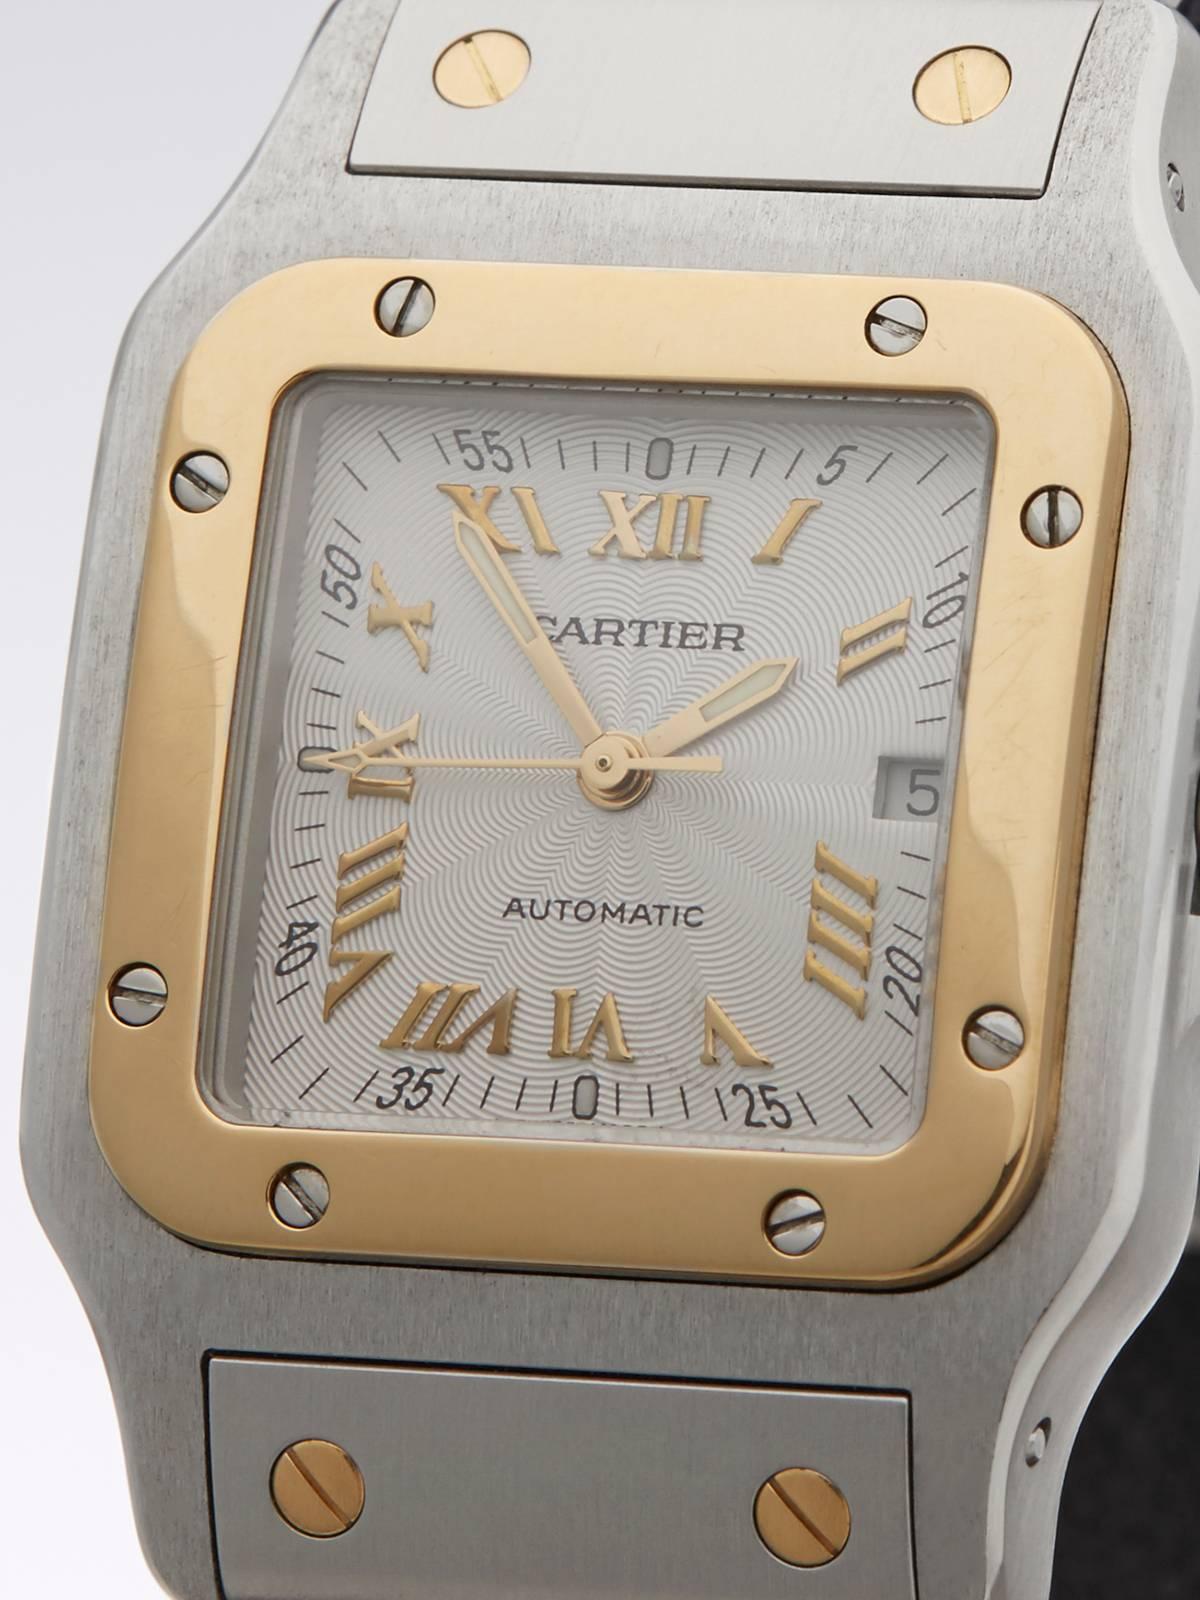 REF	W3228
MODEL NUMBER	2319
SERIAL NUMBER	453*****
CONDITION	9 - Excellent condition
GENDER	Unisex
AGE	2004
CASE DIAMETER	30 mm
CASE SIZE	30mm by 41mm
BOX & PAPERS	Box Only
MOVEMENT	Automatic
CASE	Stainless Steel/18k Yellow Gold
DIAL	Silver